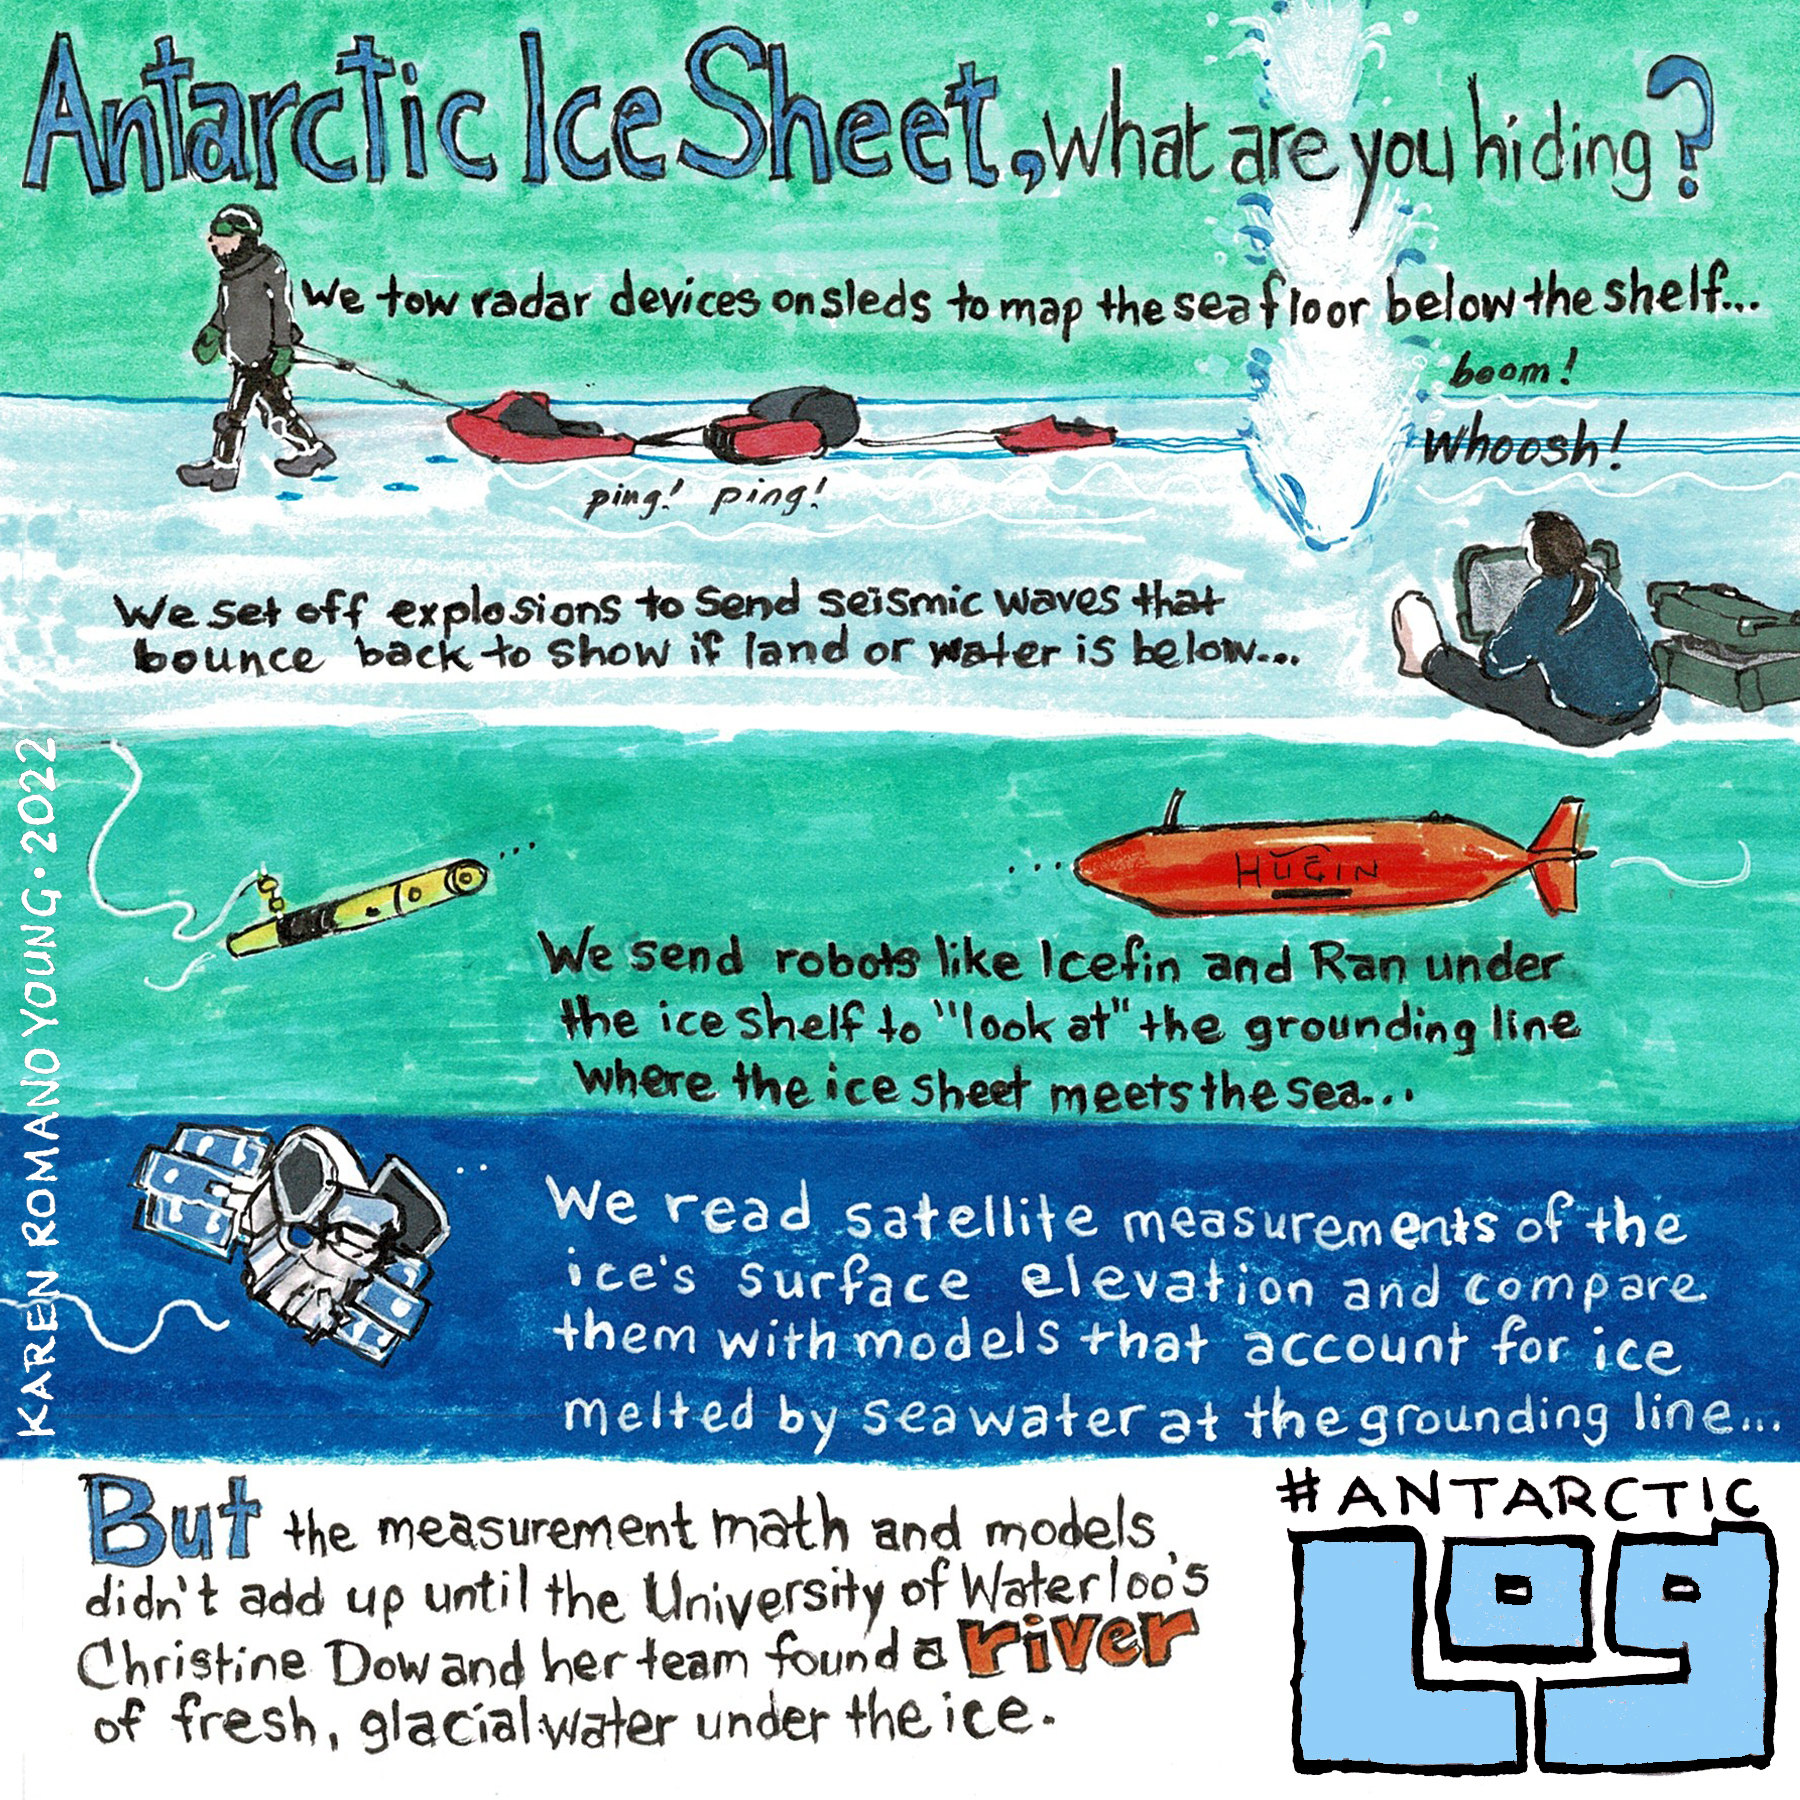 A drawing of ice and the water below, asking, Antarctic Ice Sheet, what are you hiding? And explaining how scientists use everything from seismic waves to robots to computer models to understand more about the ice sheet and what lies beneath it.